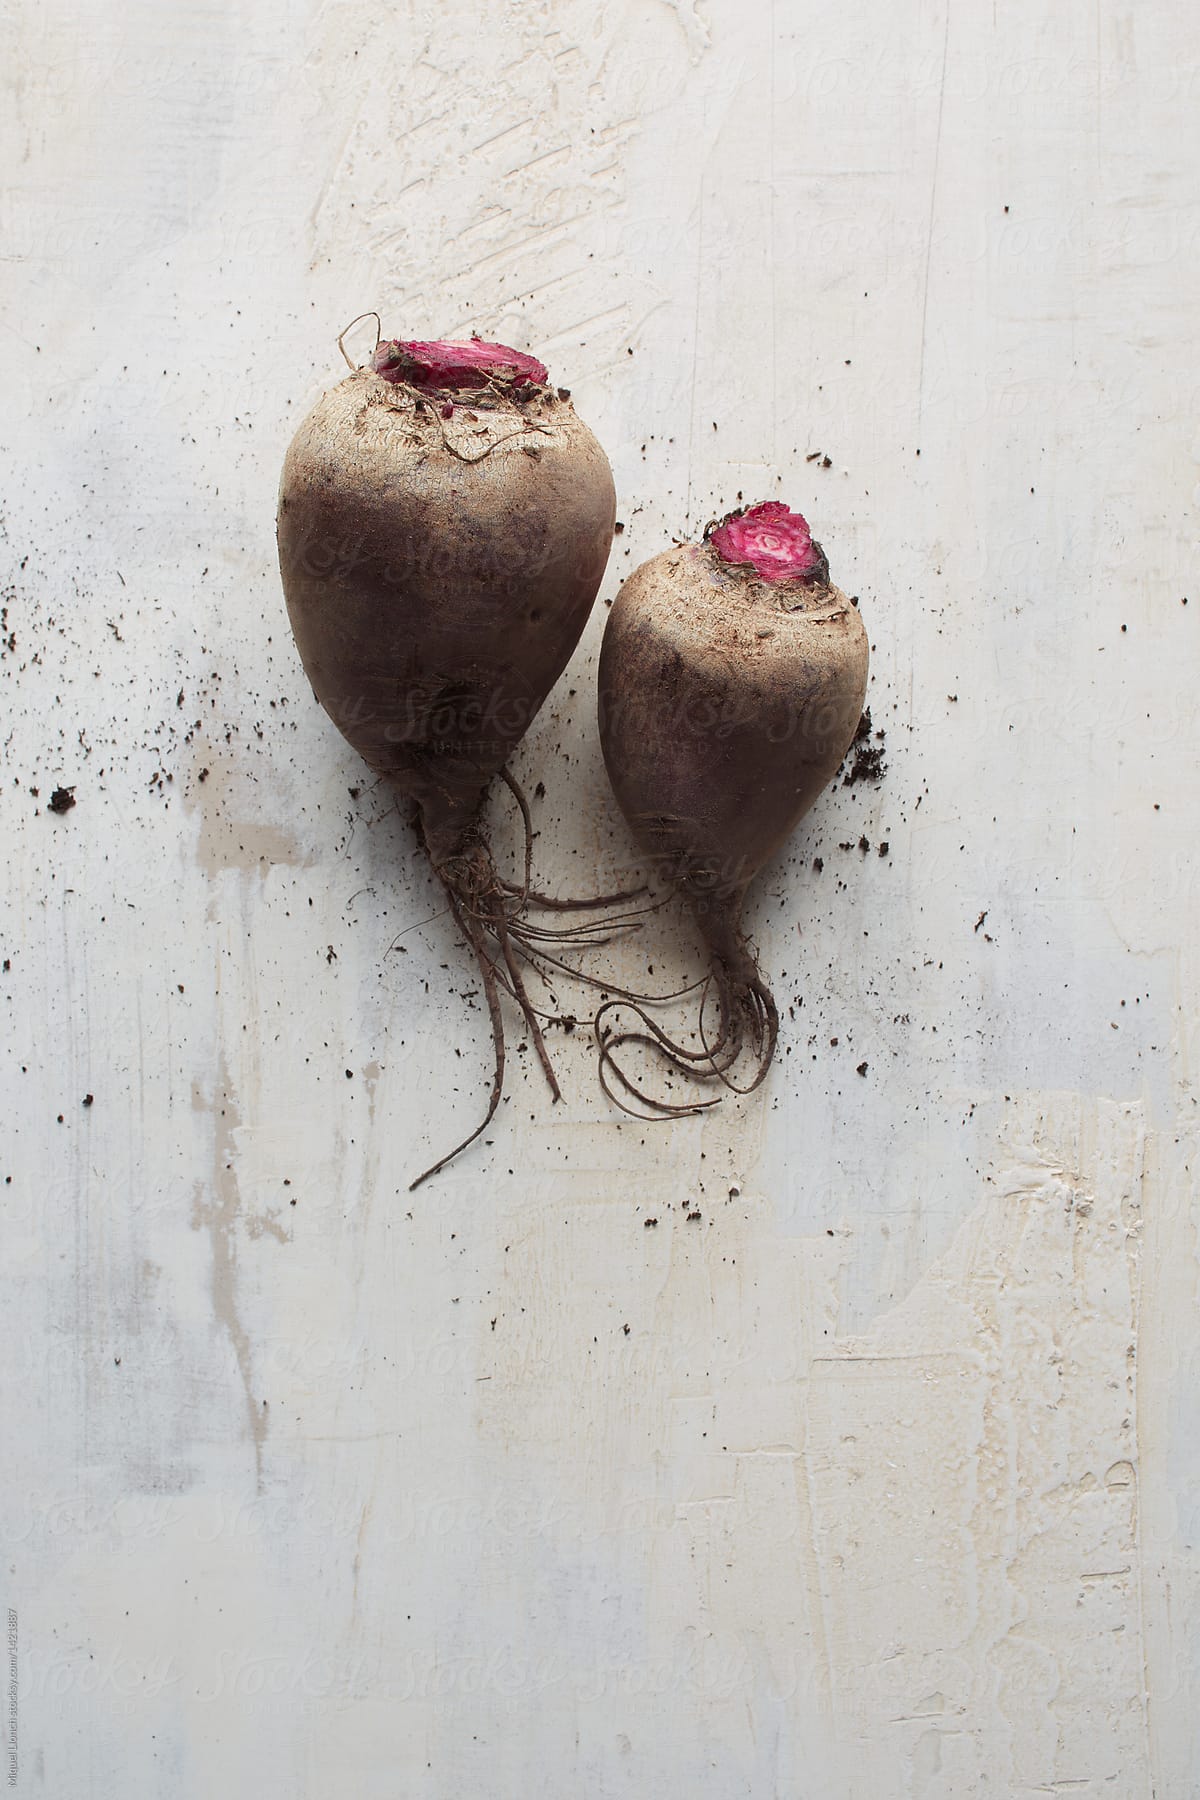 Still of two fresh beets on old painted surface